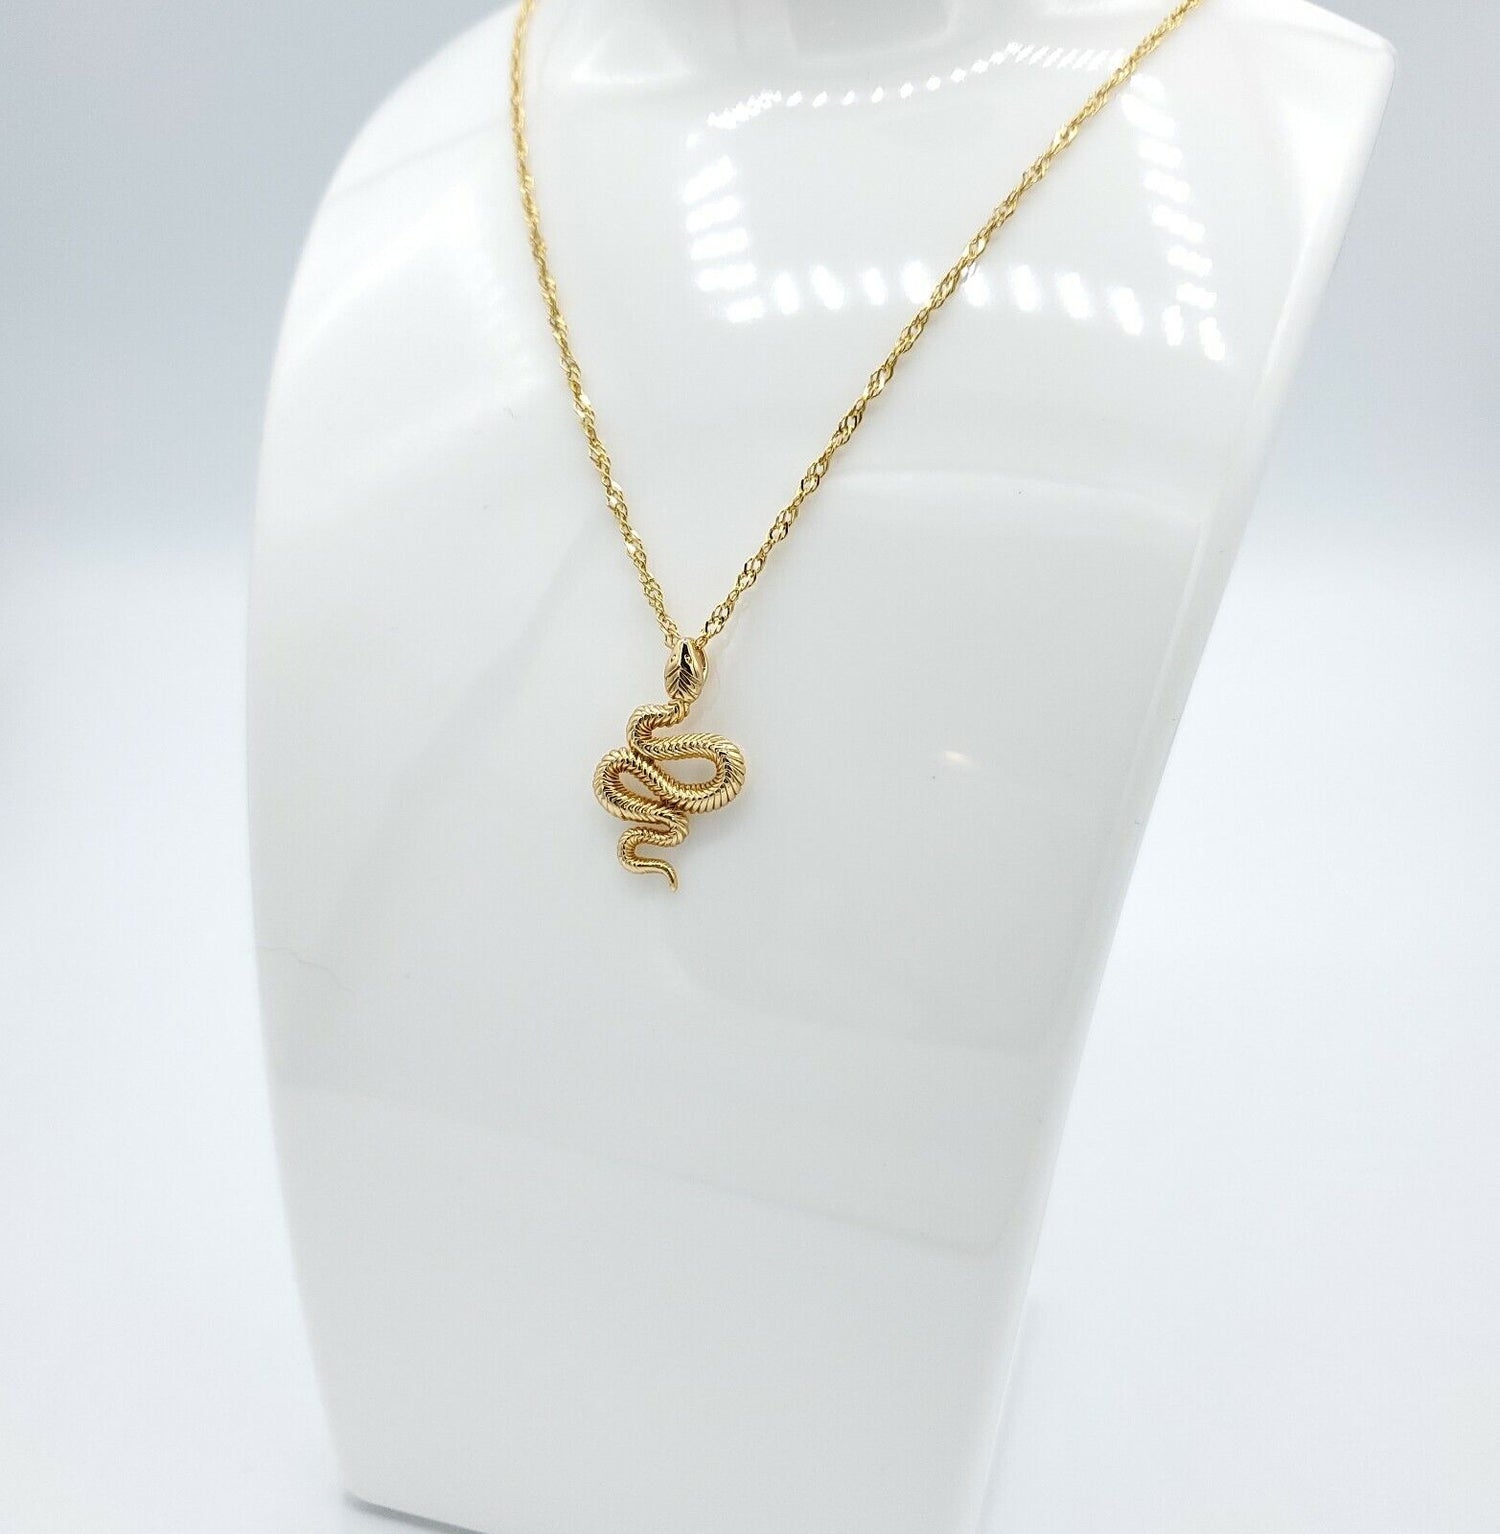 Year of the Snake Silver Necklace-Ringified Jewelry